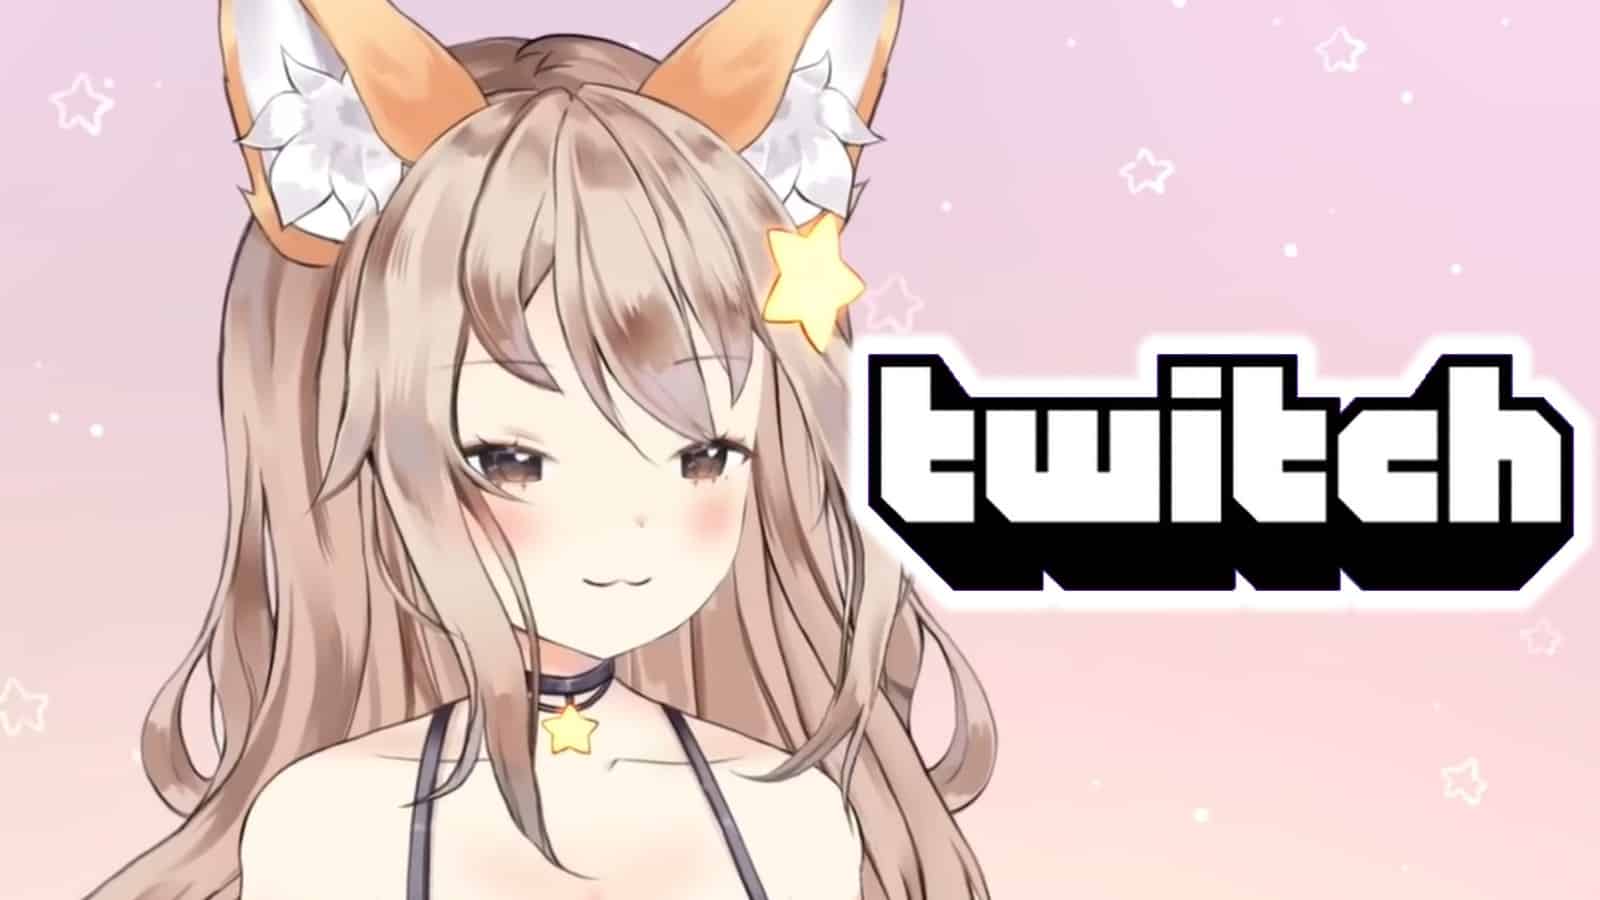 Vtuber anny streaming with Twitch logo